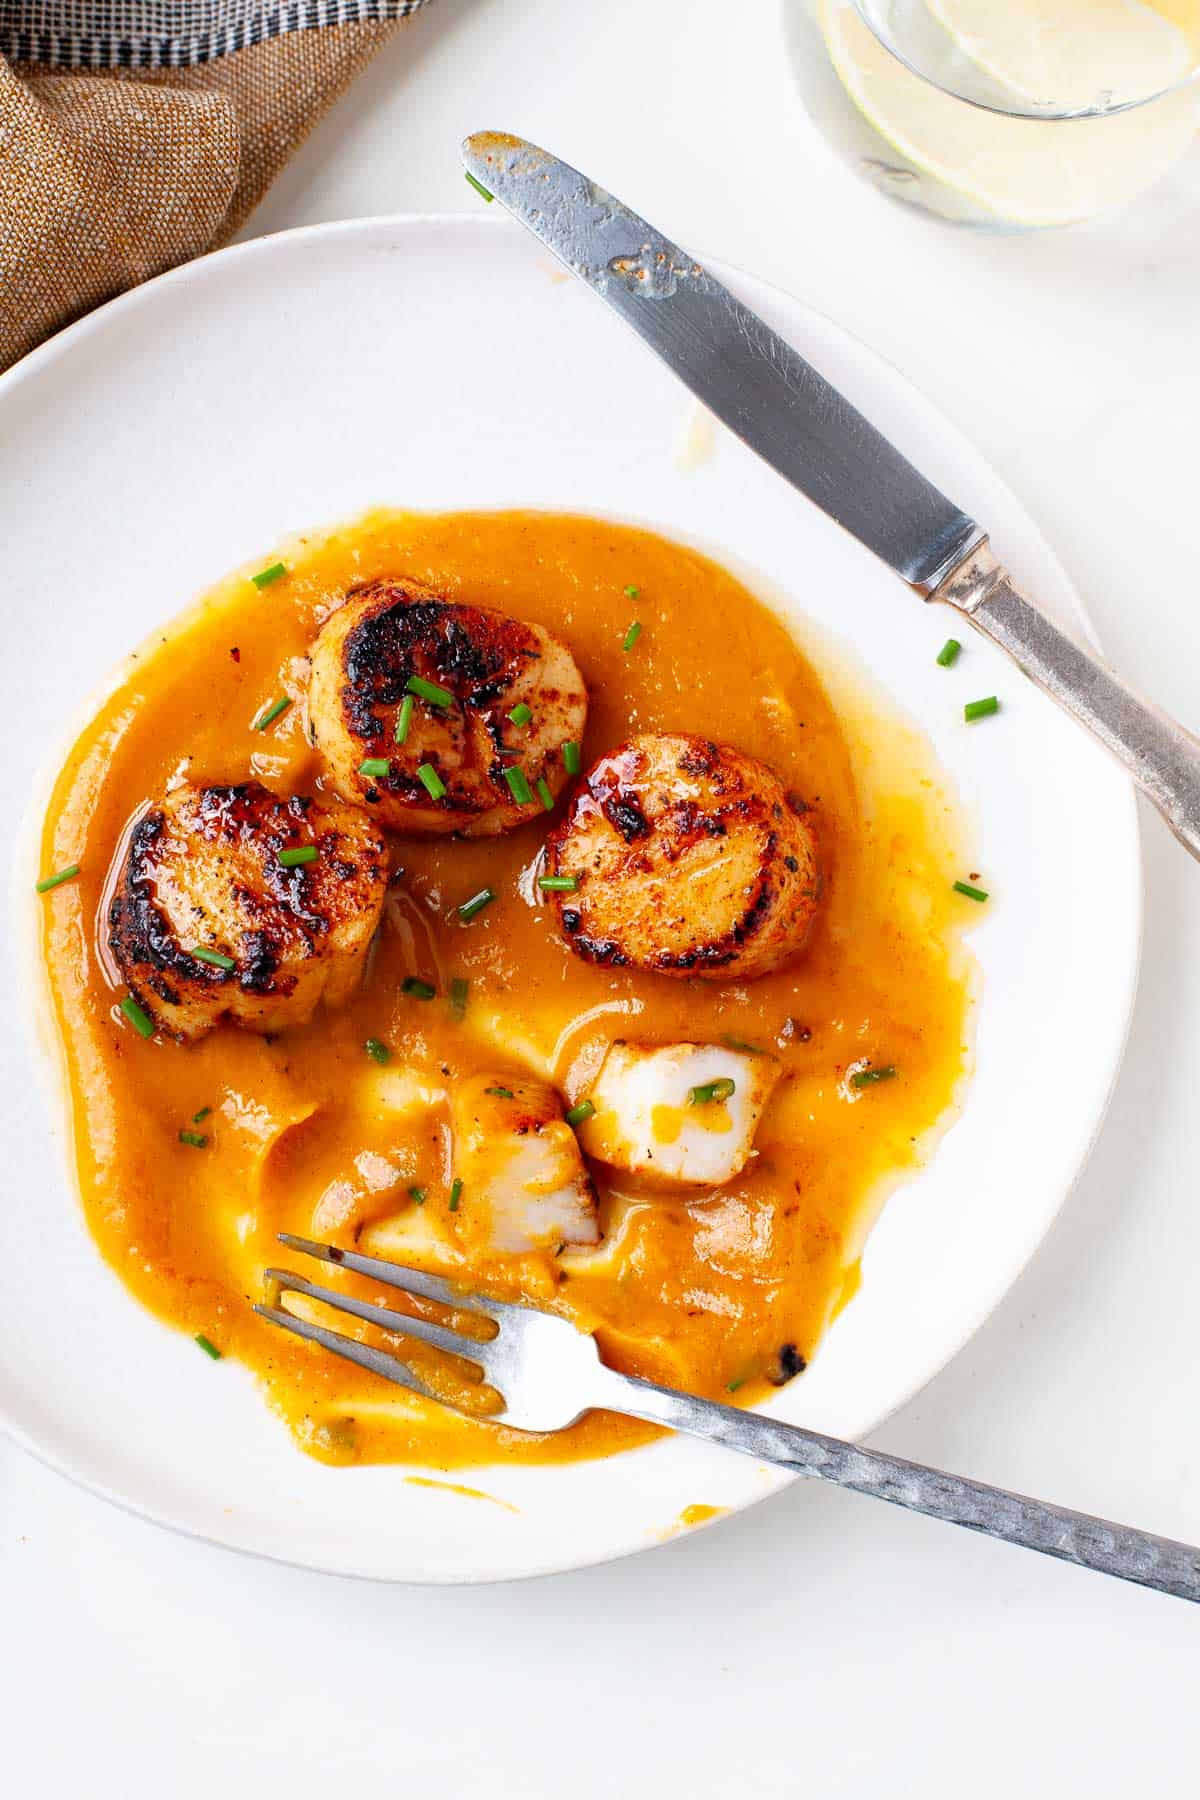 blackened scallops atop squash puree on a white dish with a silver fork and knife. 